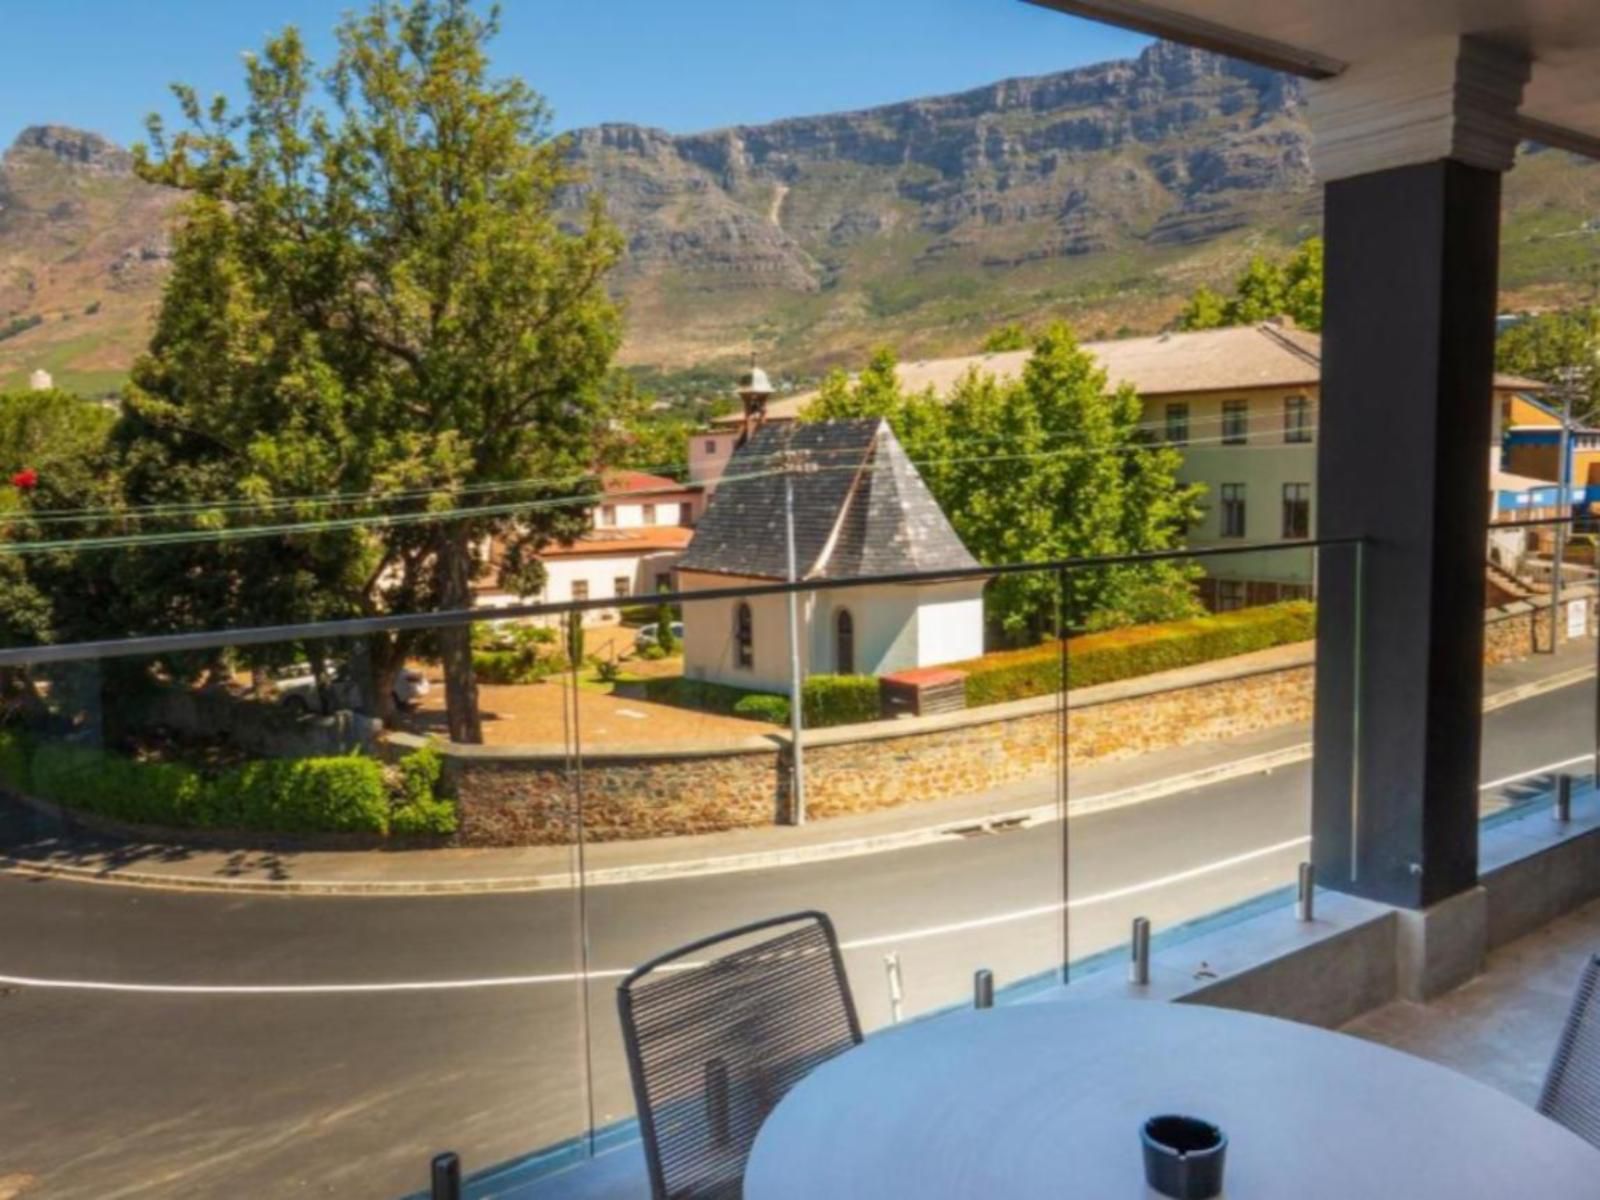 Cloud 9 Boutique Hotel And Spa Tamboerskloof Cape Town Western Cape South Africa House, Building, Architecture, Window